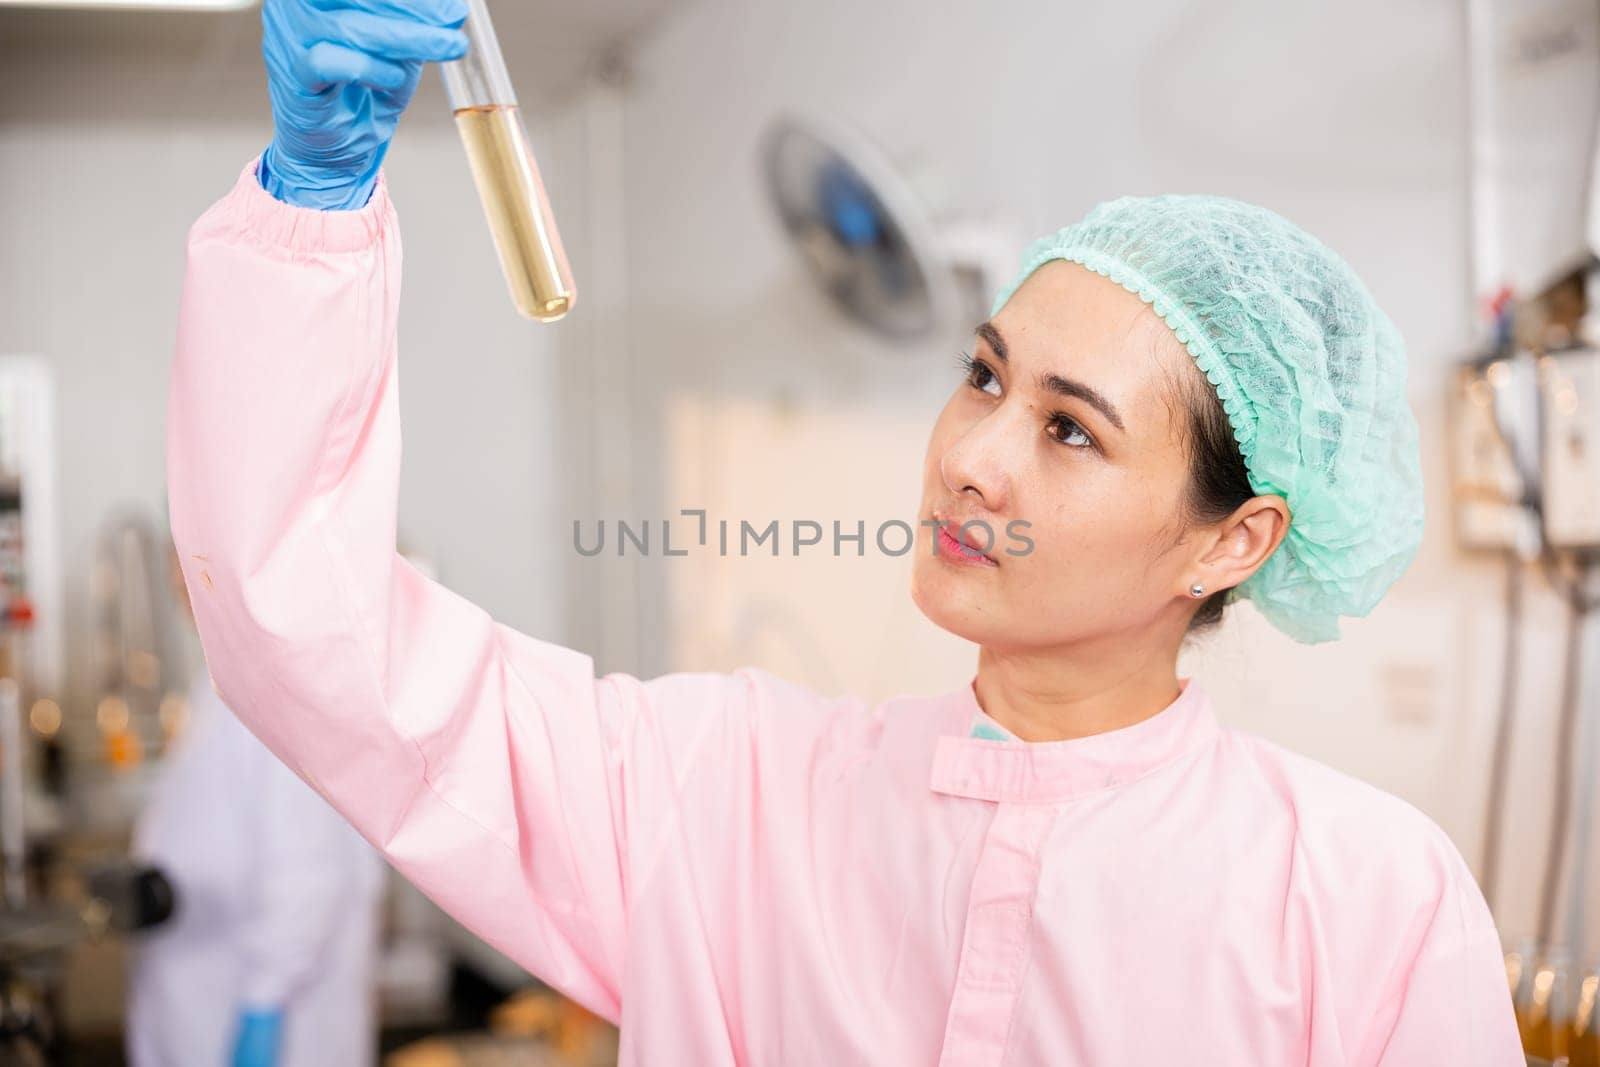 Woman food engineer demonstrates food and beverage quality and safety testing in juice beverage factory using test tubes to sample basil or chia seeds in bottled expertise in laboratory control.